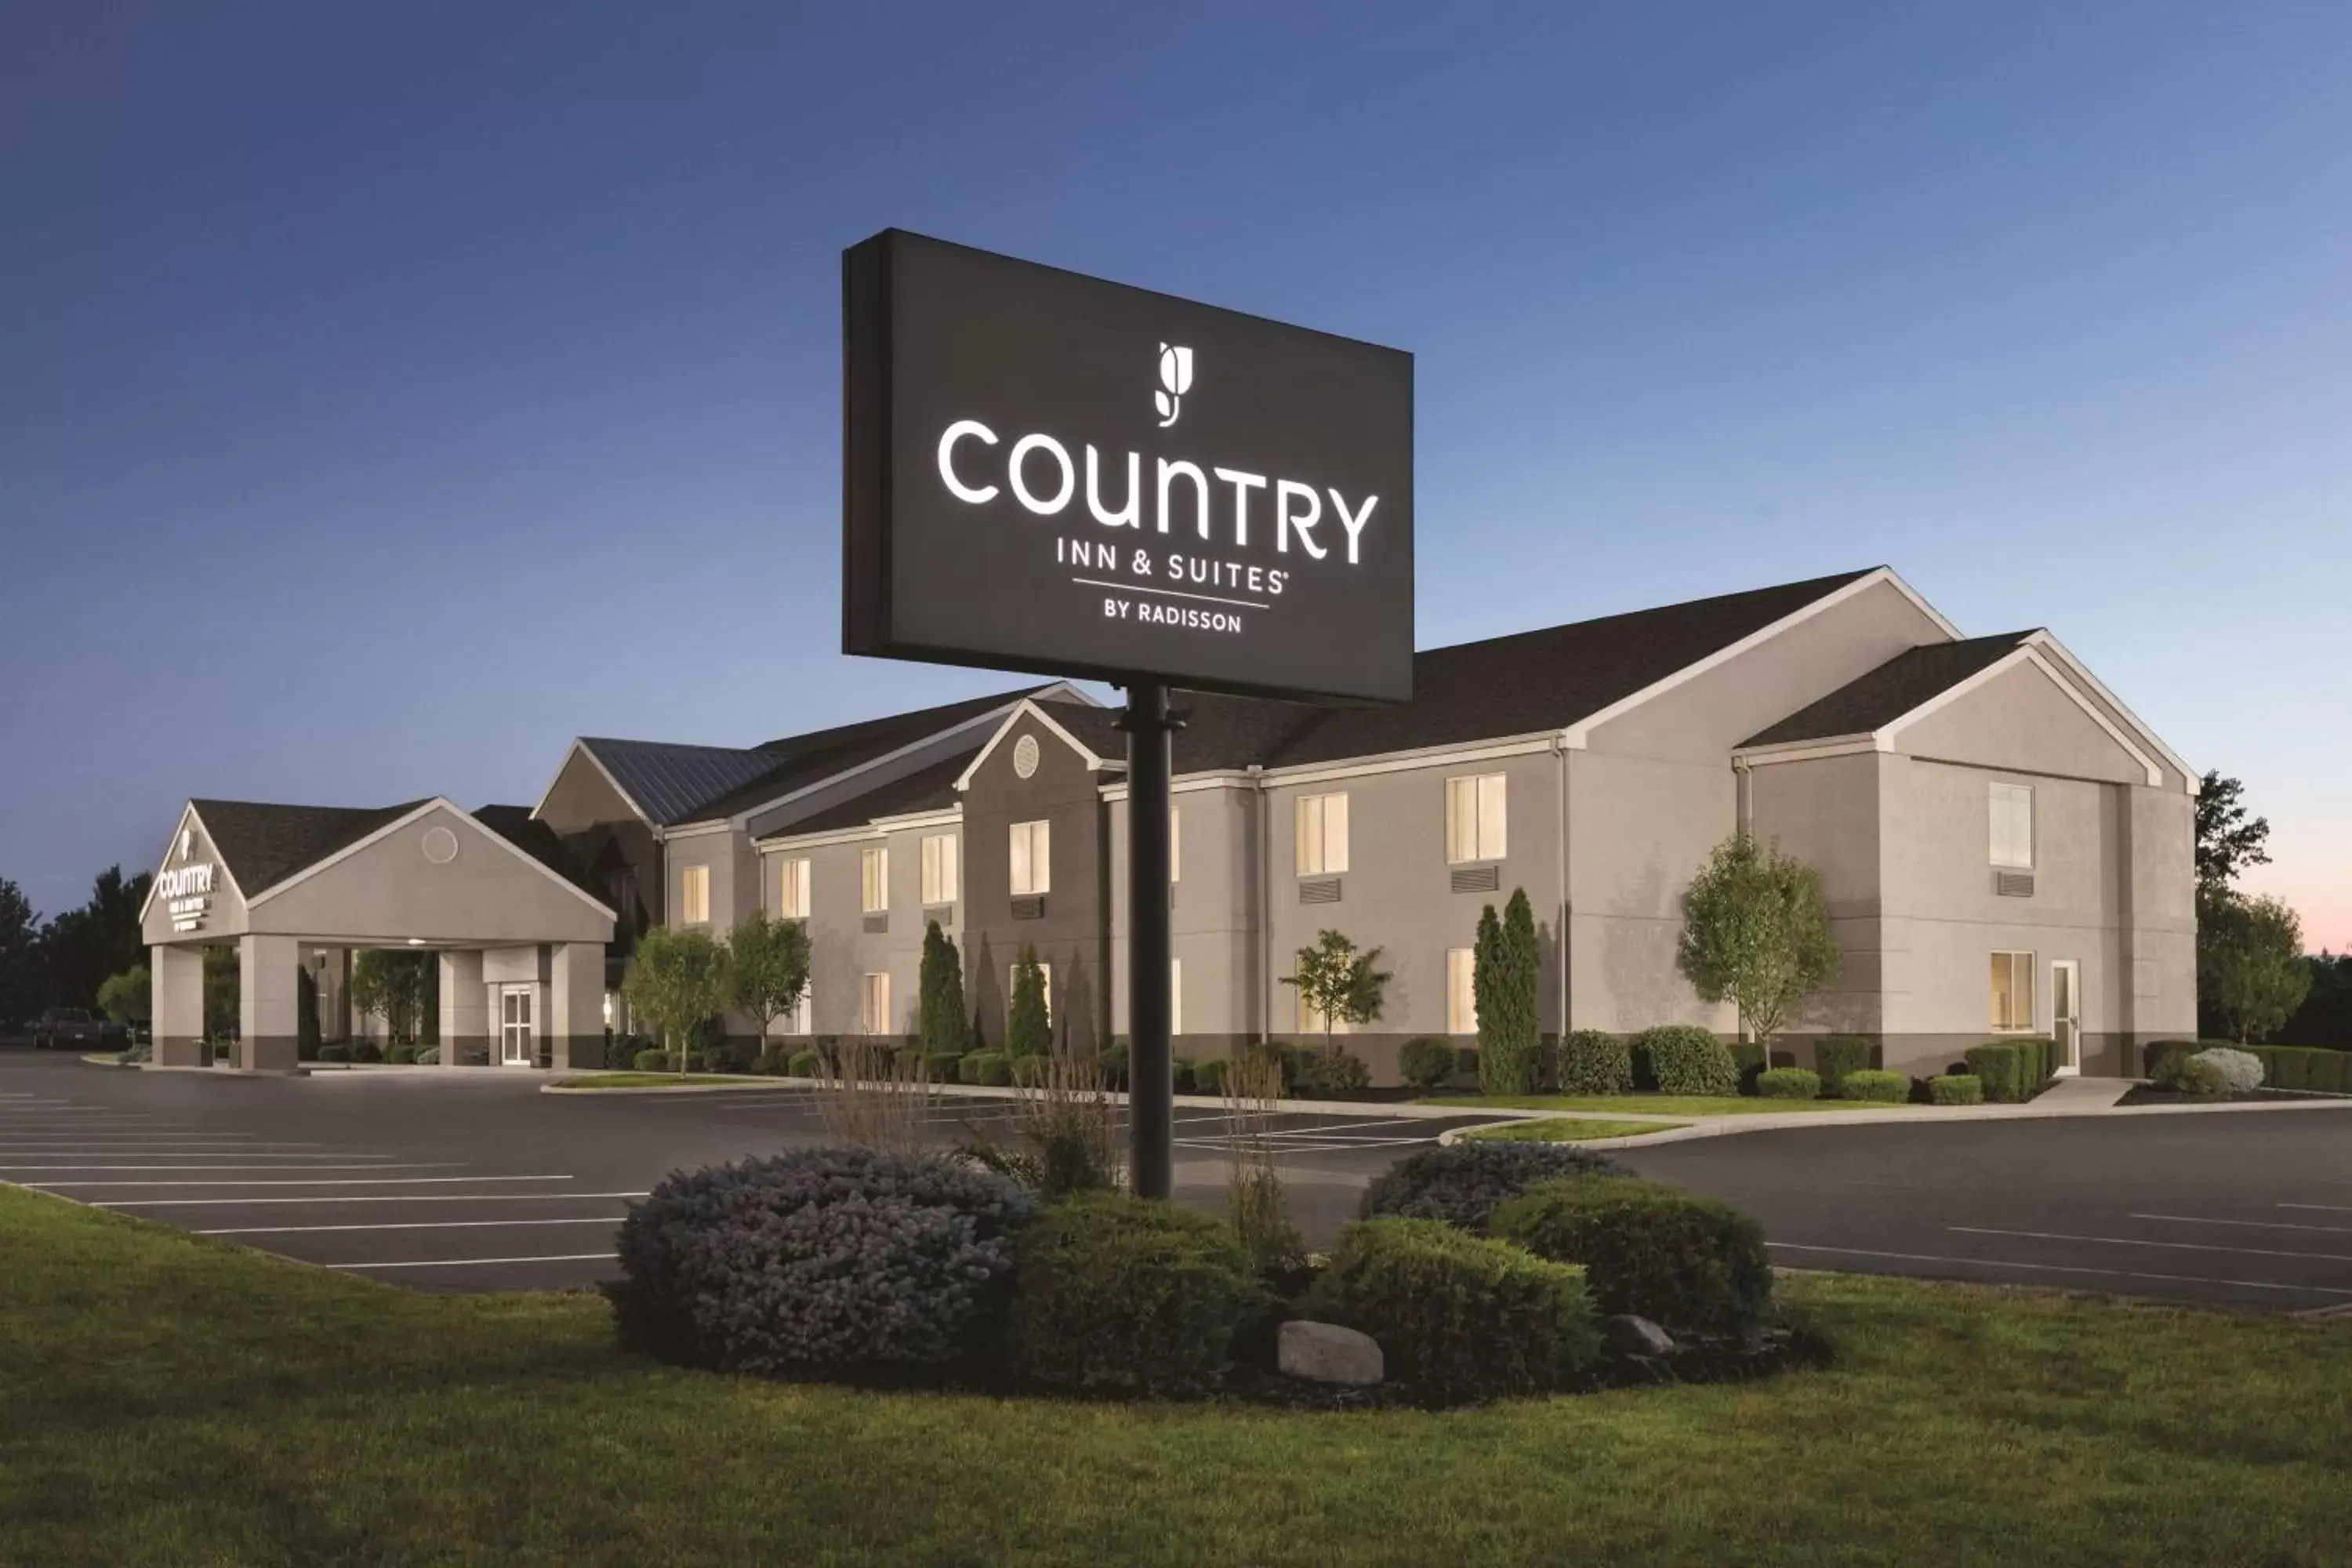 Property Building in Country Inn & Suites by Radisson, Port Clinton, OH